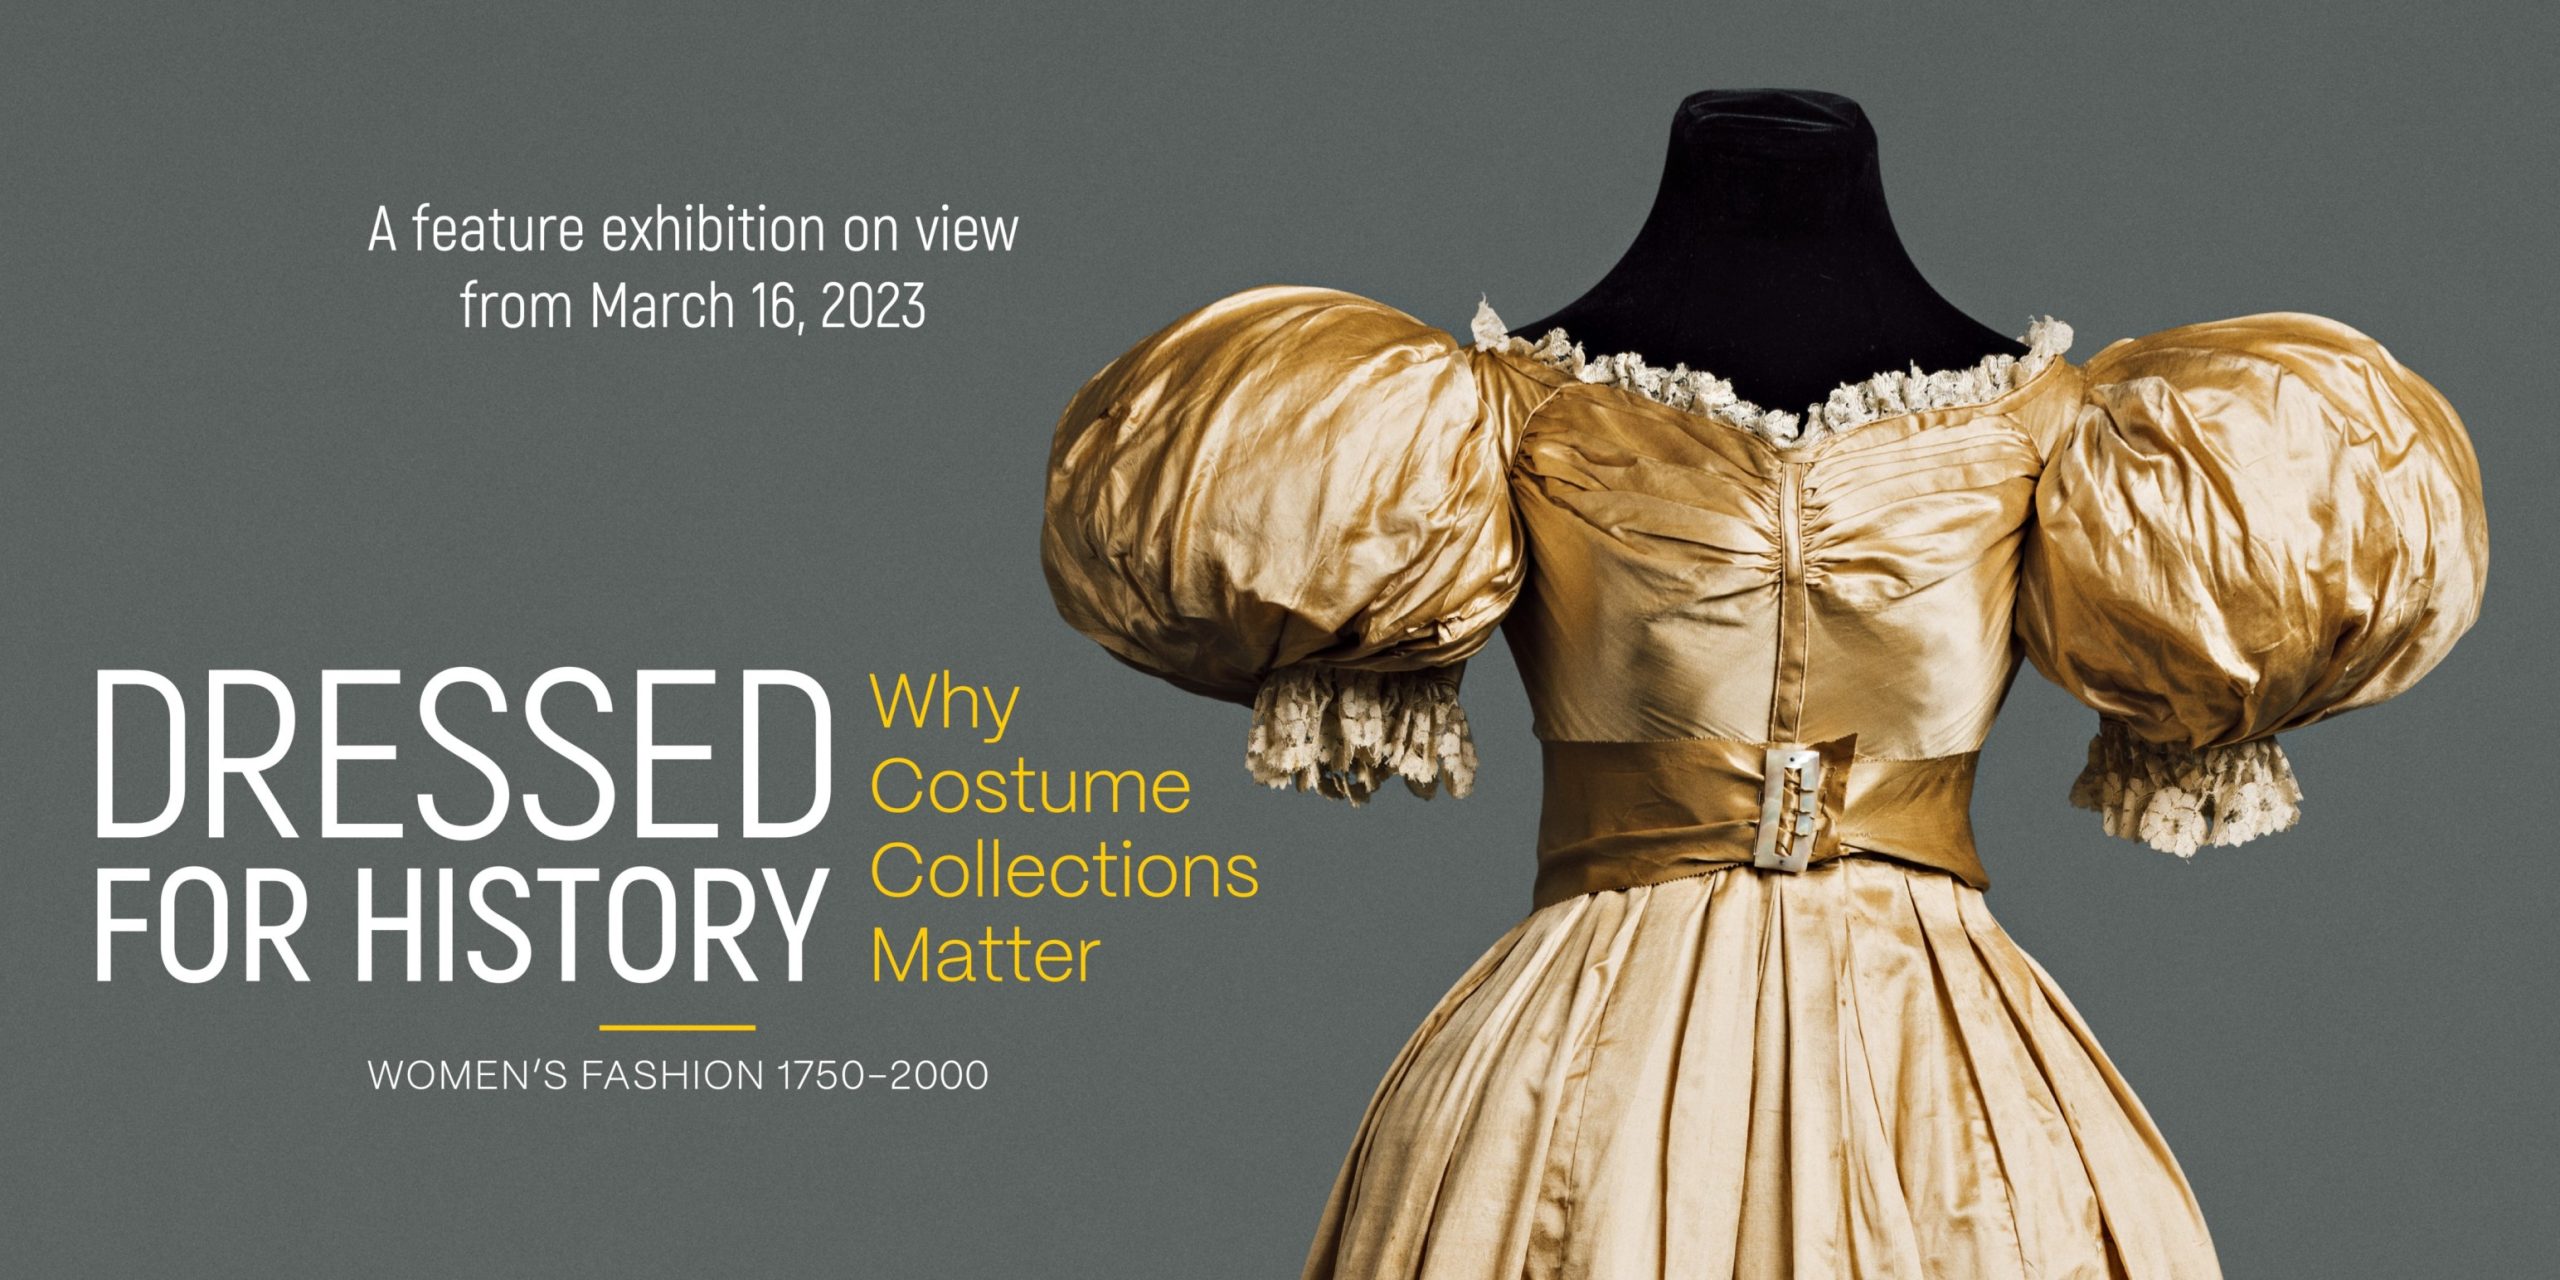 Dressed for History: Why Costume Collections Matter